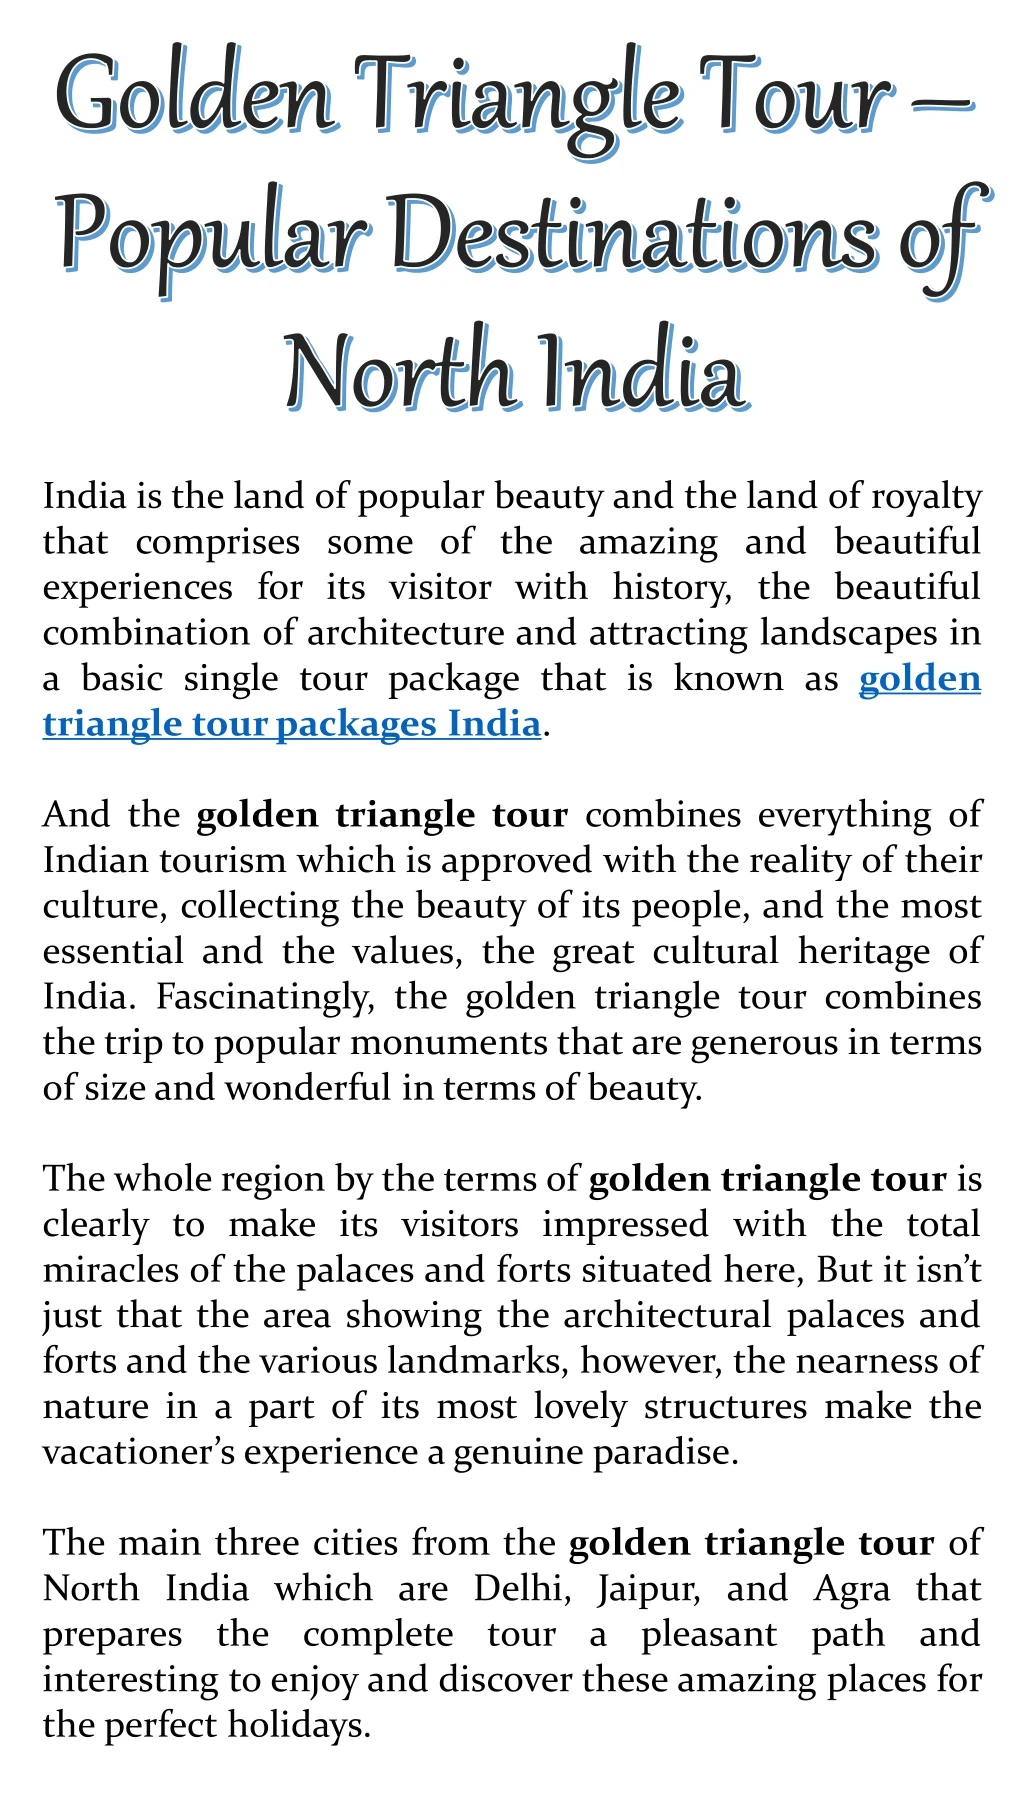 india is the land of popular beauty and the land